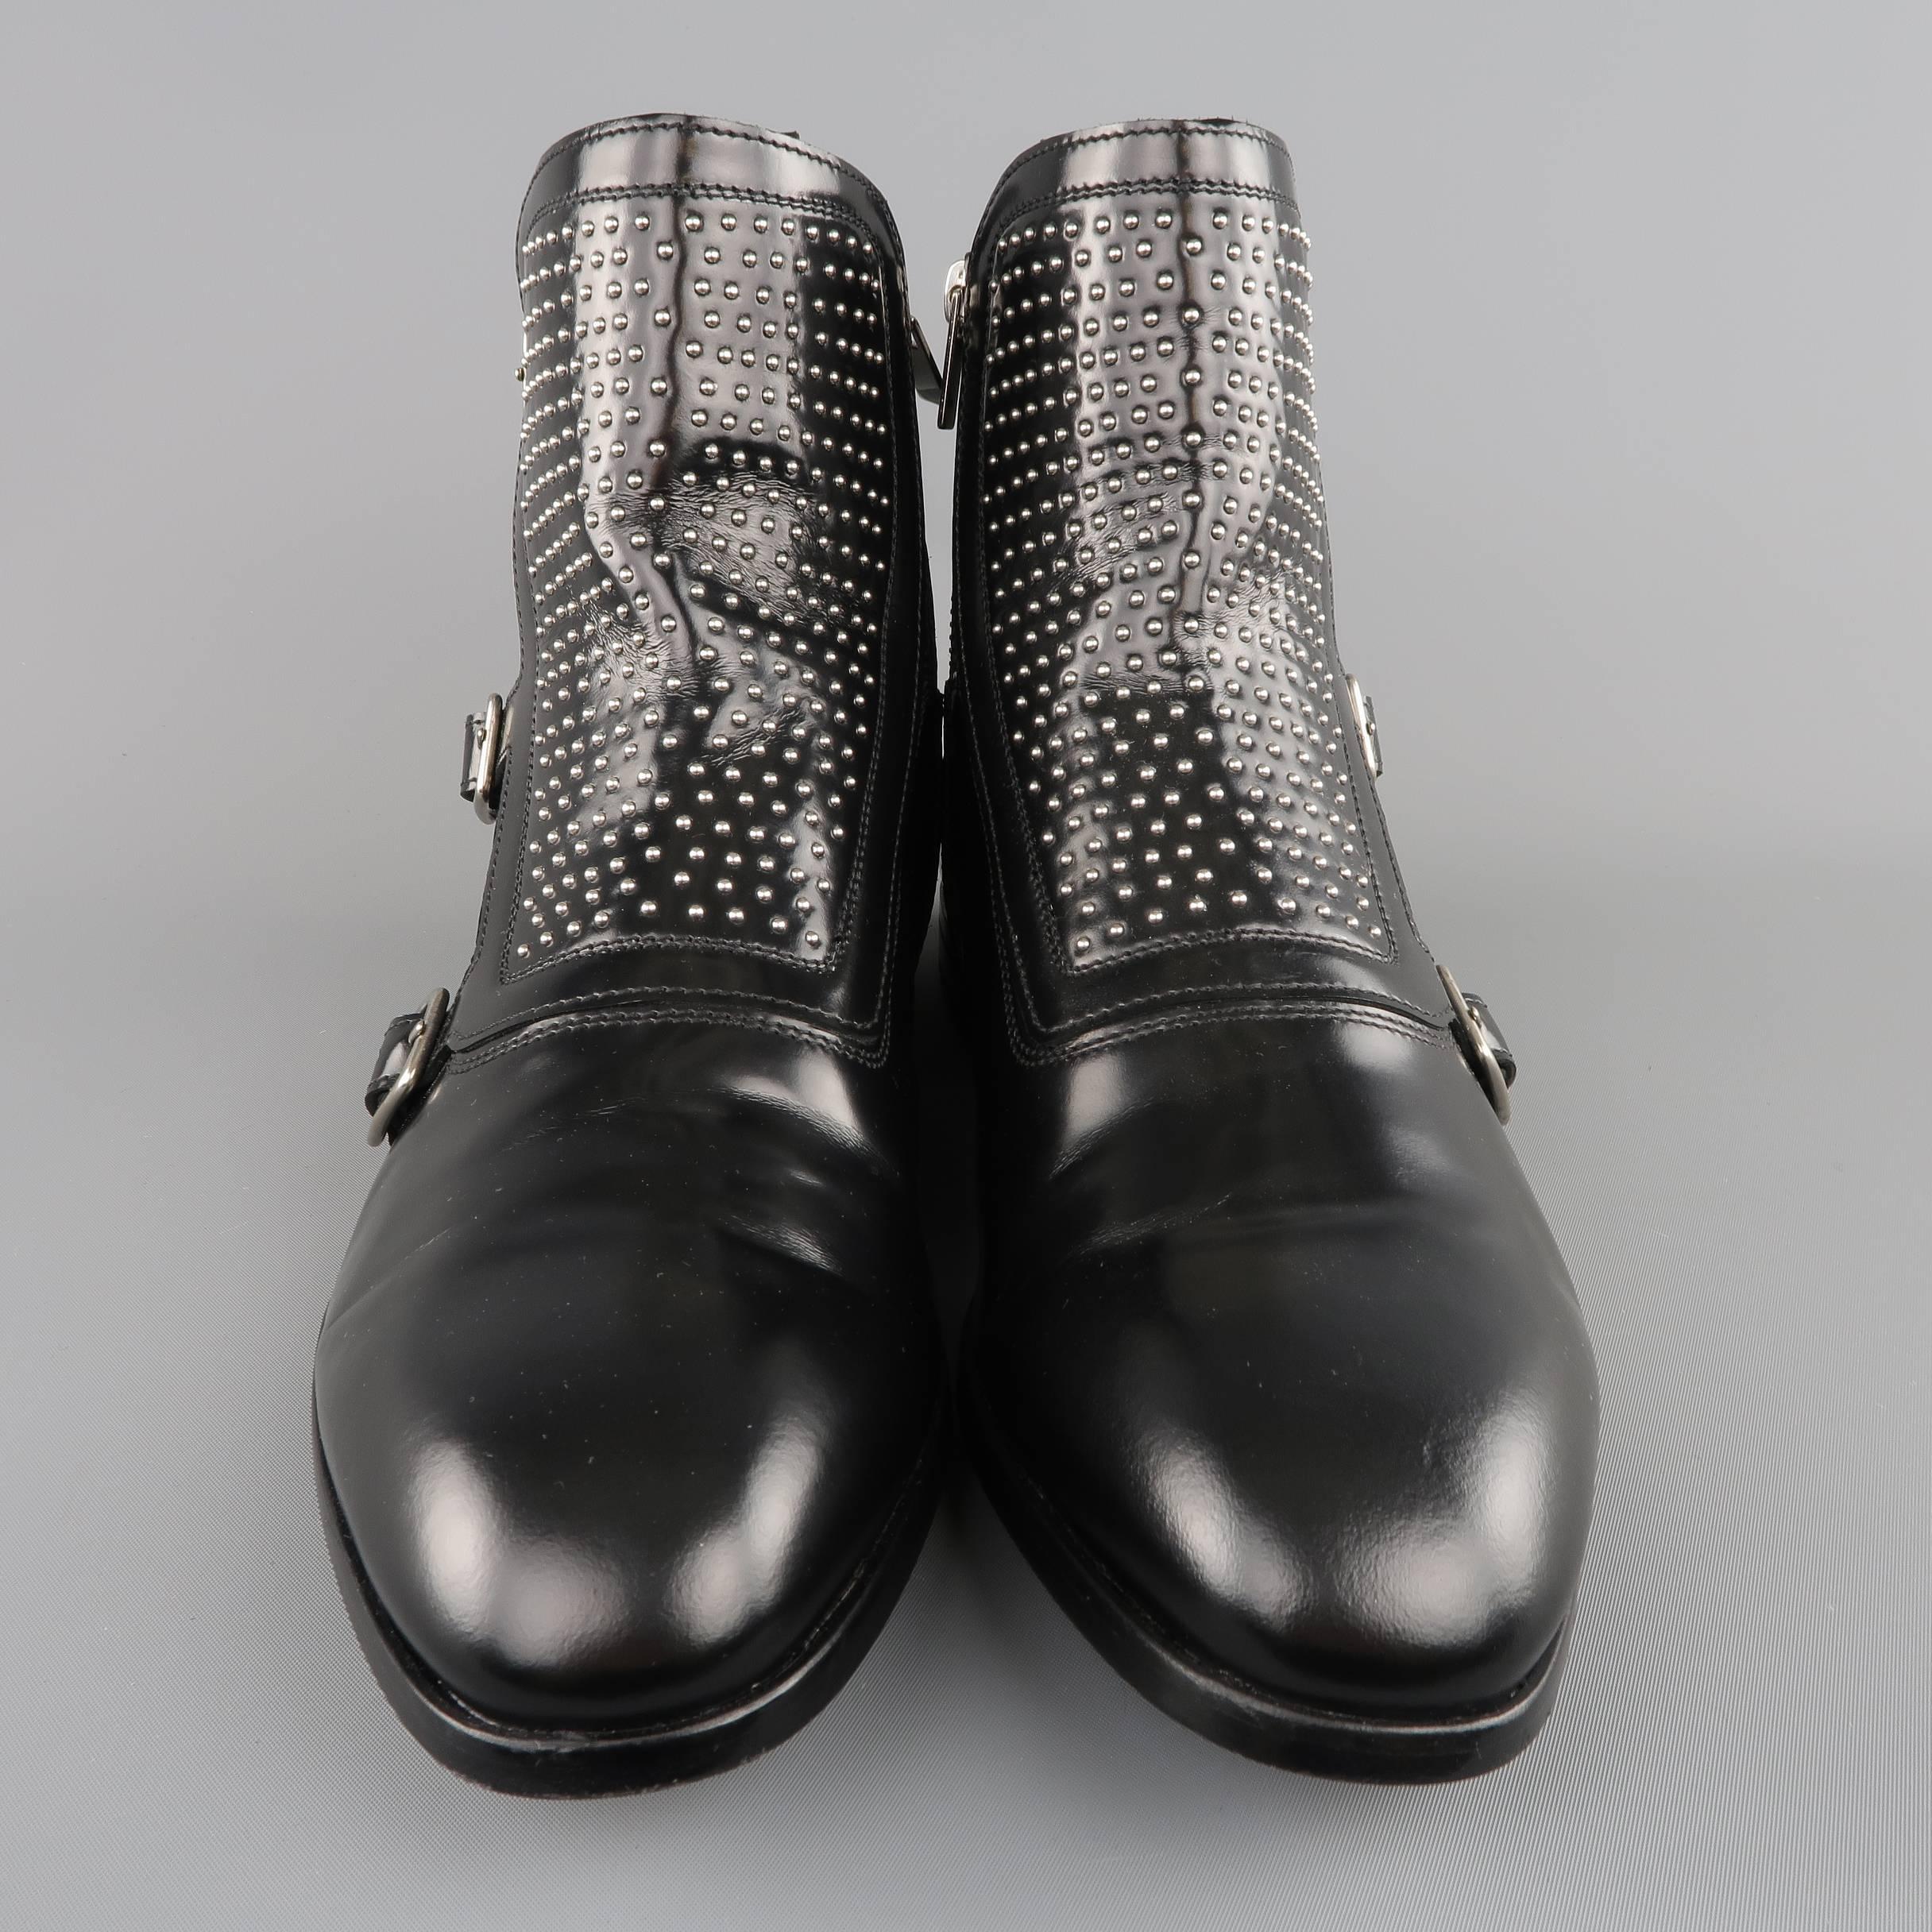 ALEXANDER MCQUEEN ankle boots come in smooth black leather and feature a squared point toe, and triple buckle silver tone studded monk strap. With box. Made in Italy.
 
Good Pre-Owned Condition.
Marked: IT 42
 
Height: 5.5 in.
Outsole: 11.75 x 4